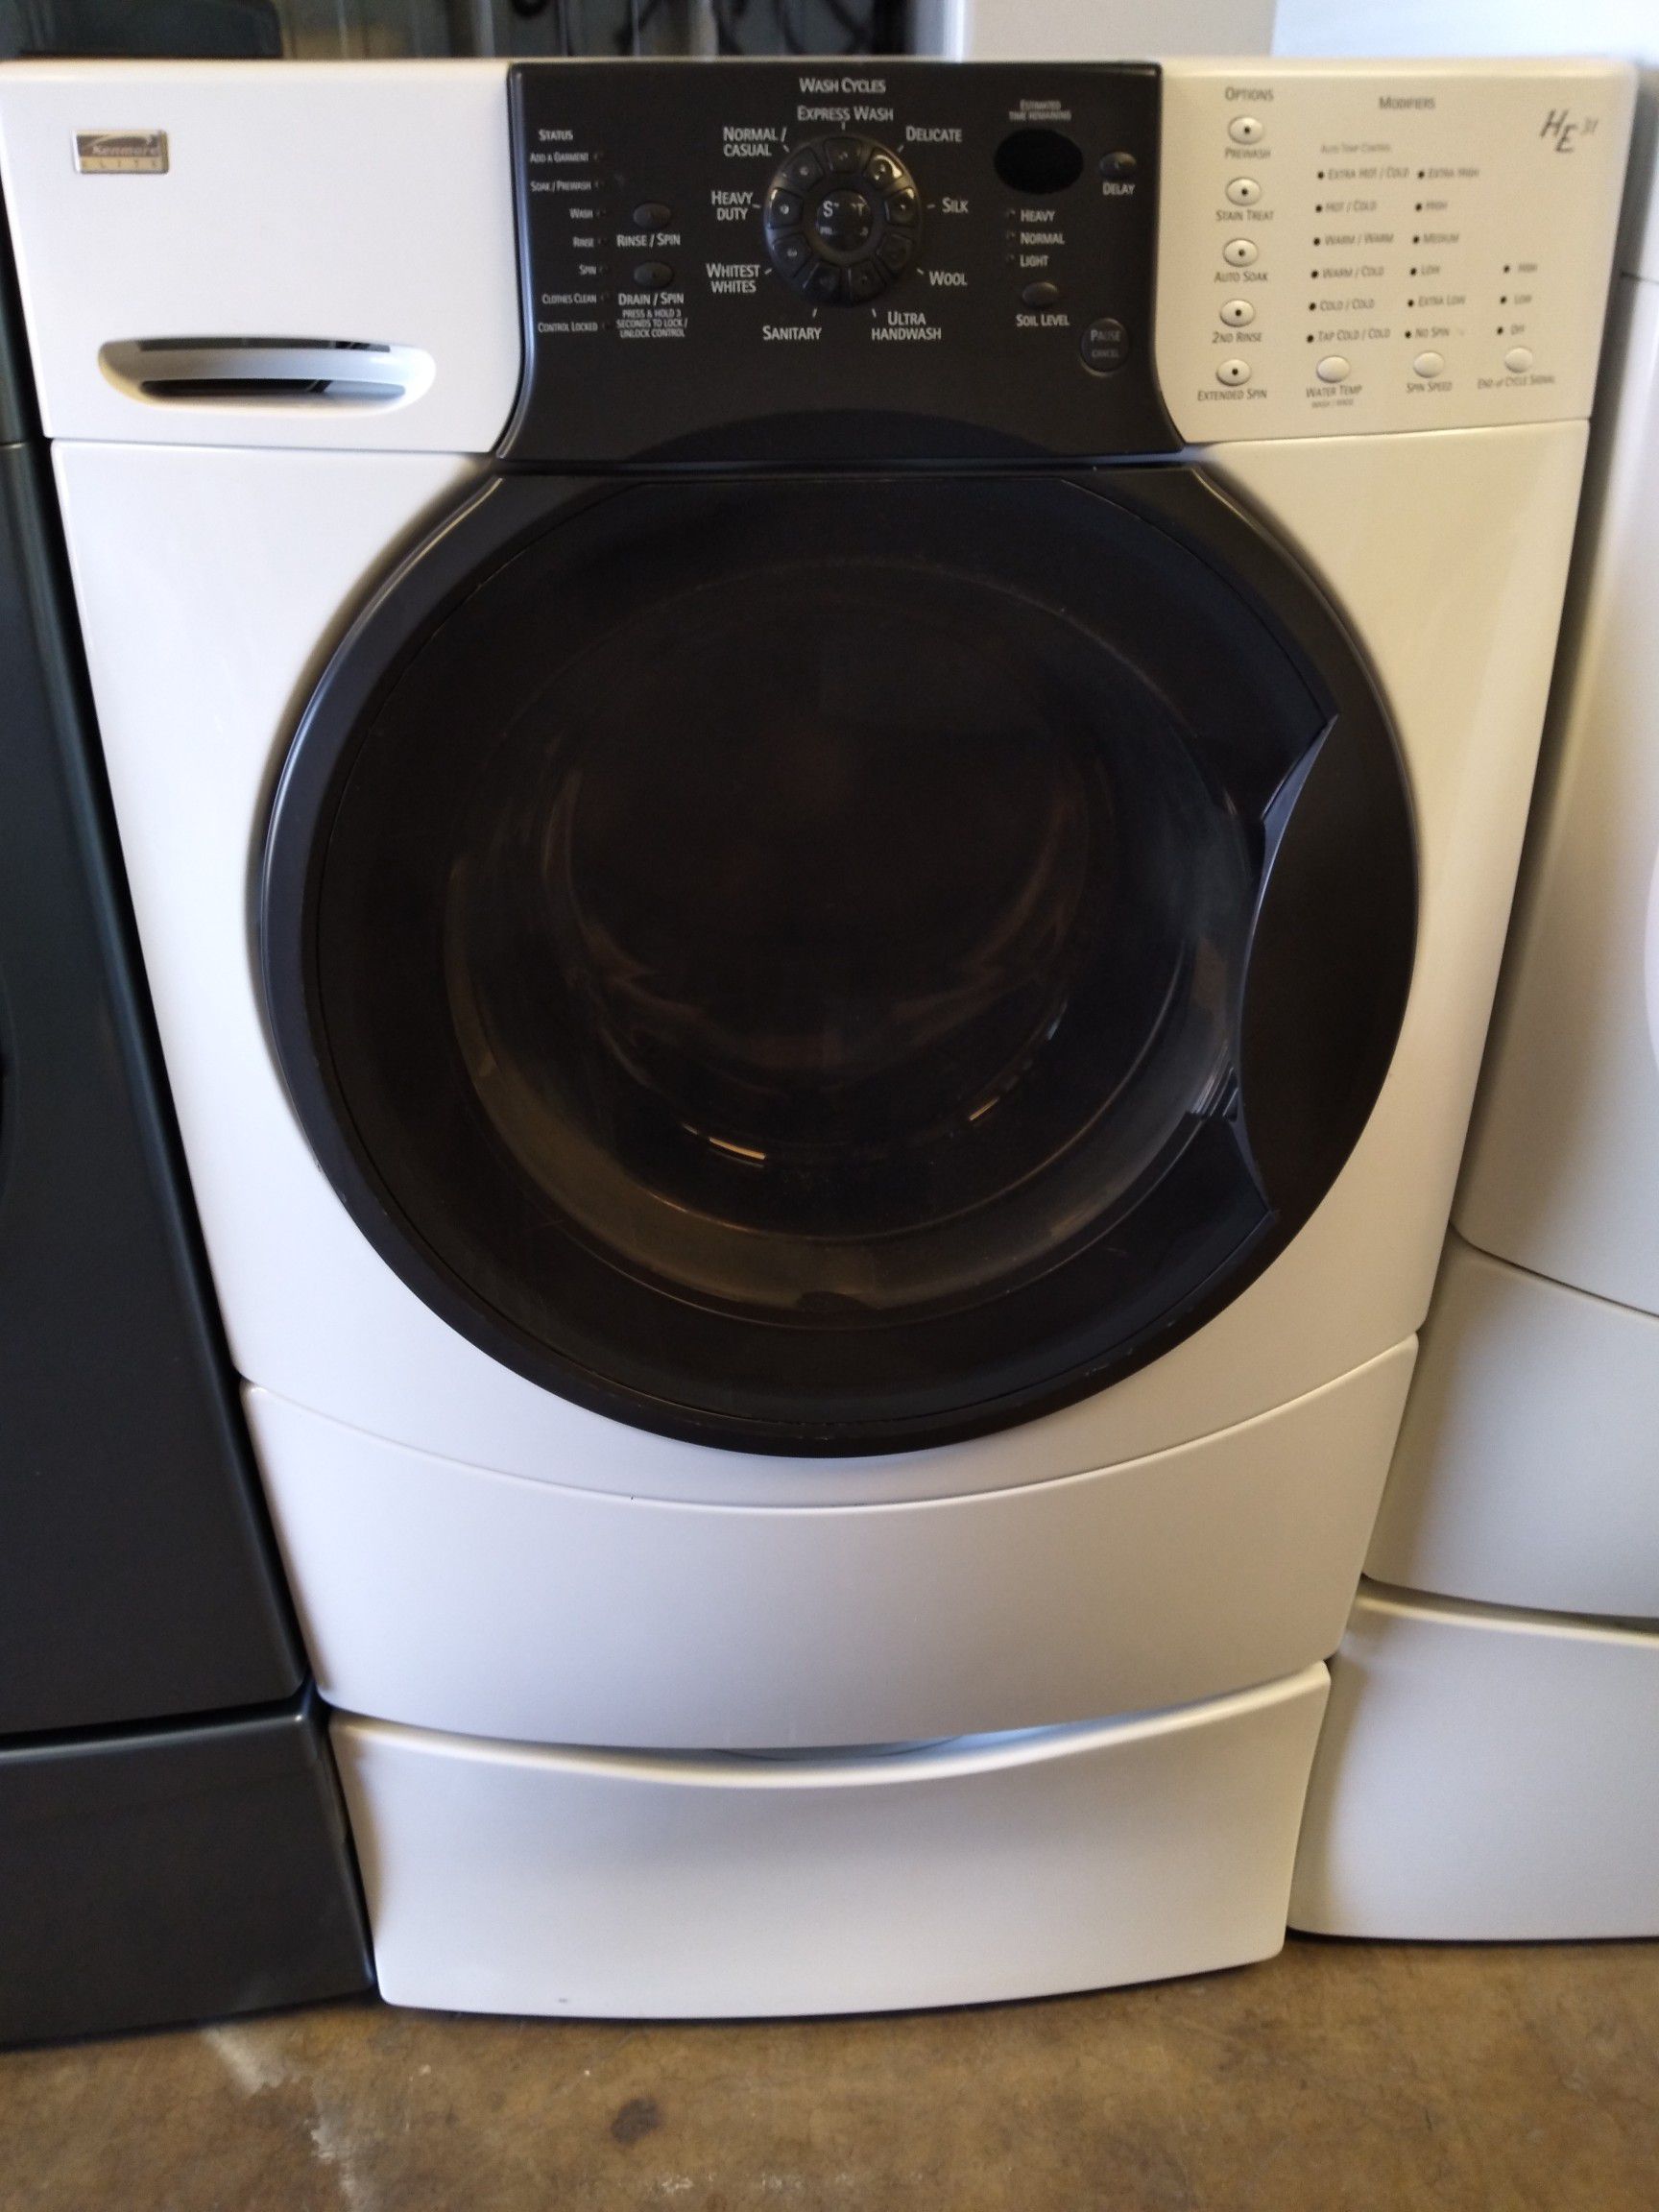 Kenmore Washer $200 With Warranty